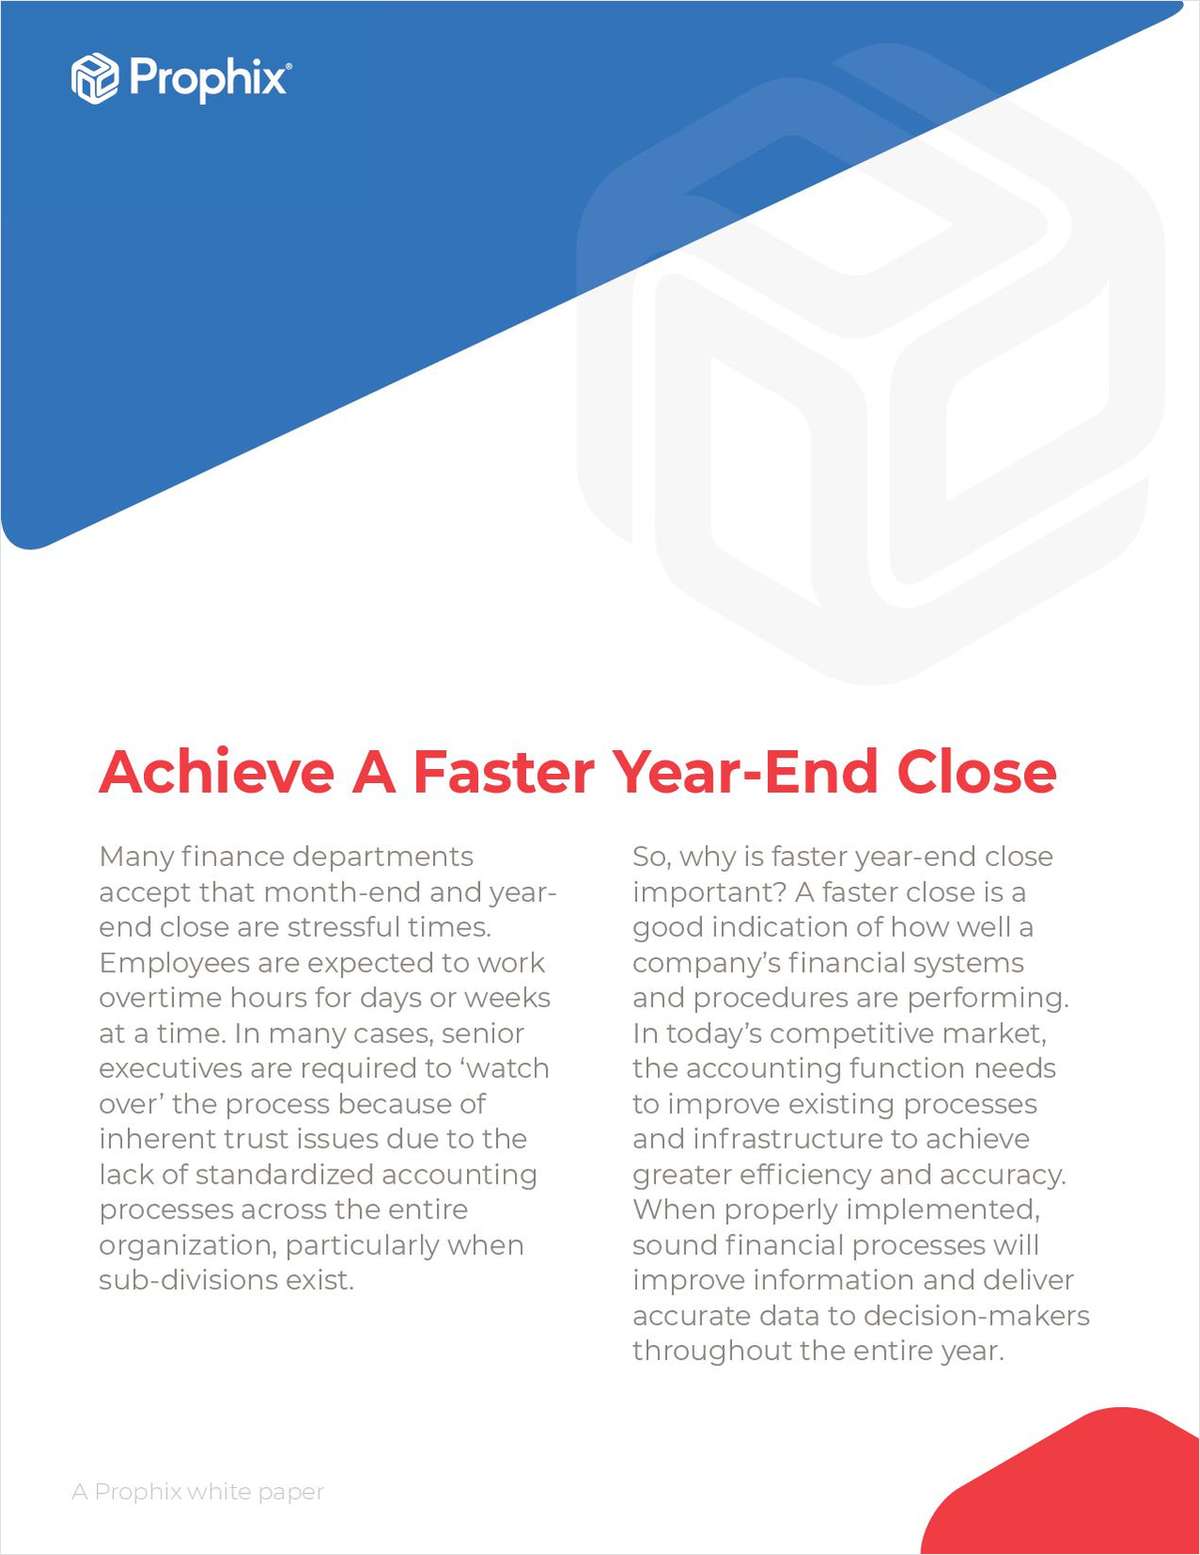 Achieve A Faster Year-End Close